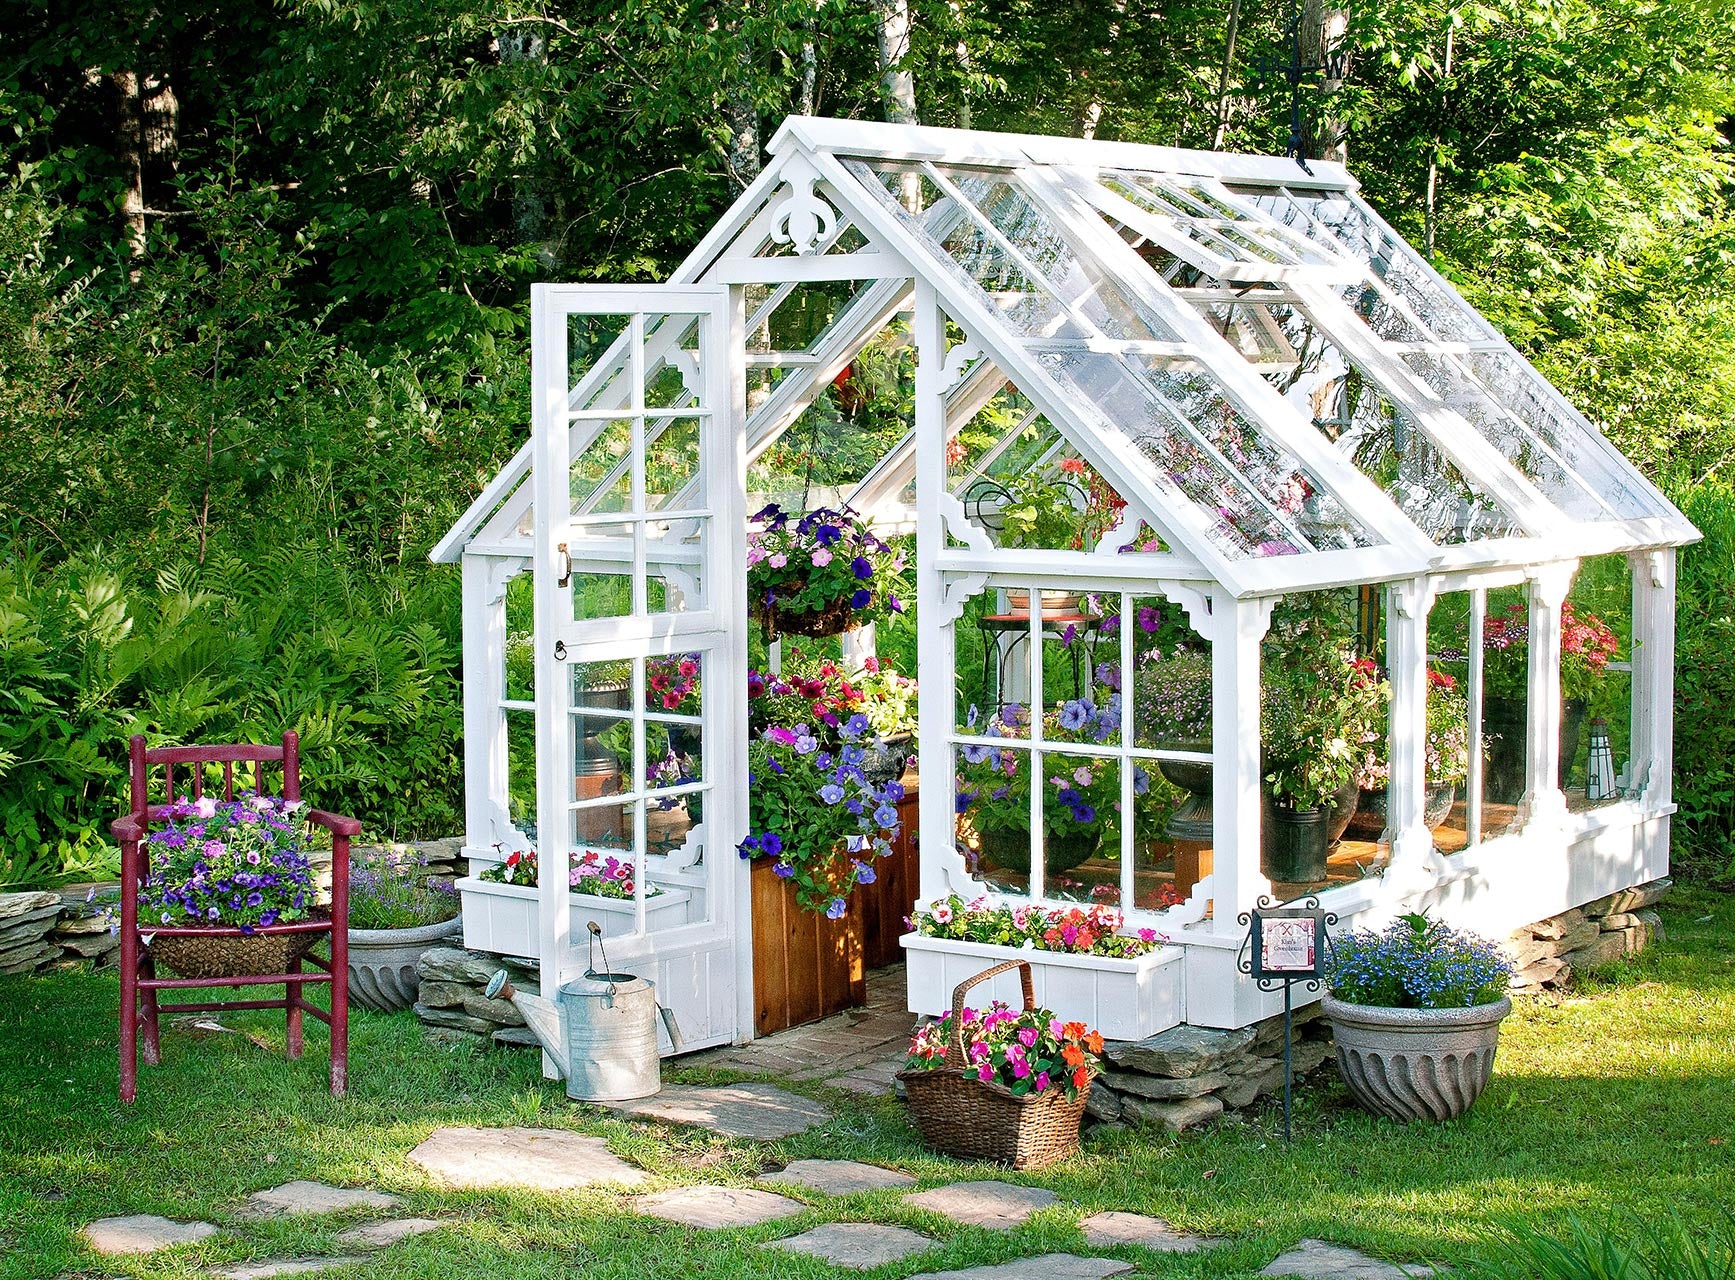 How To Care For Your Garden Shed